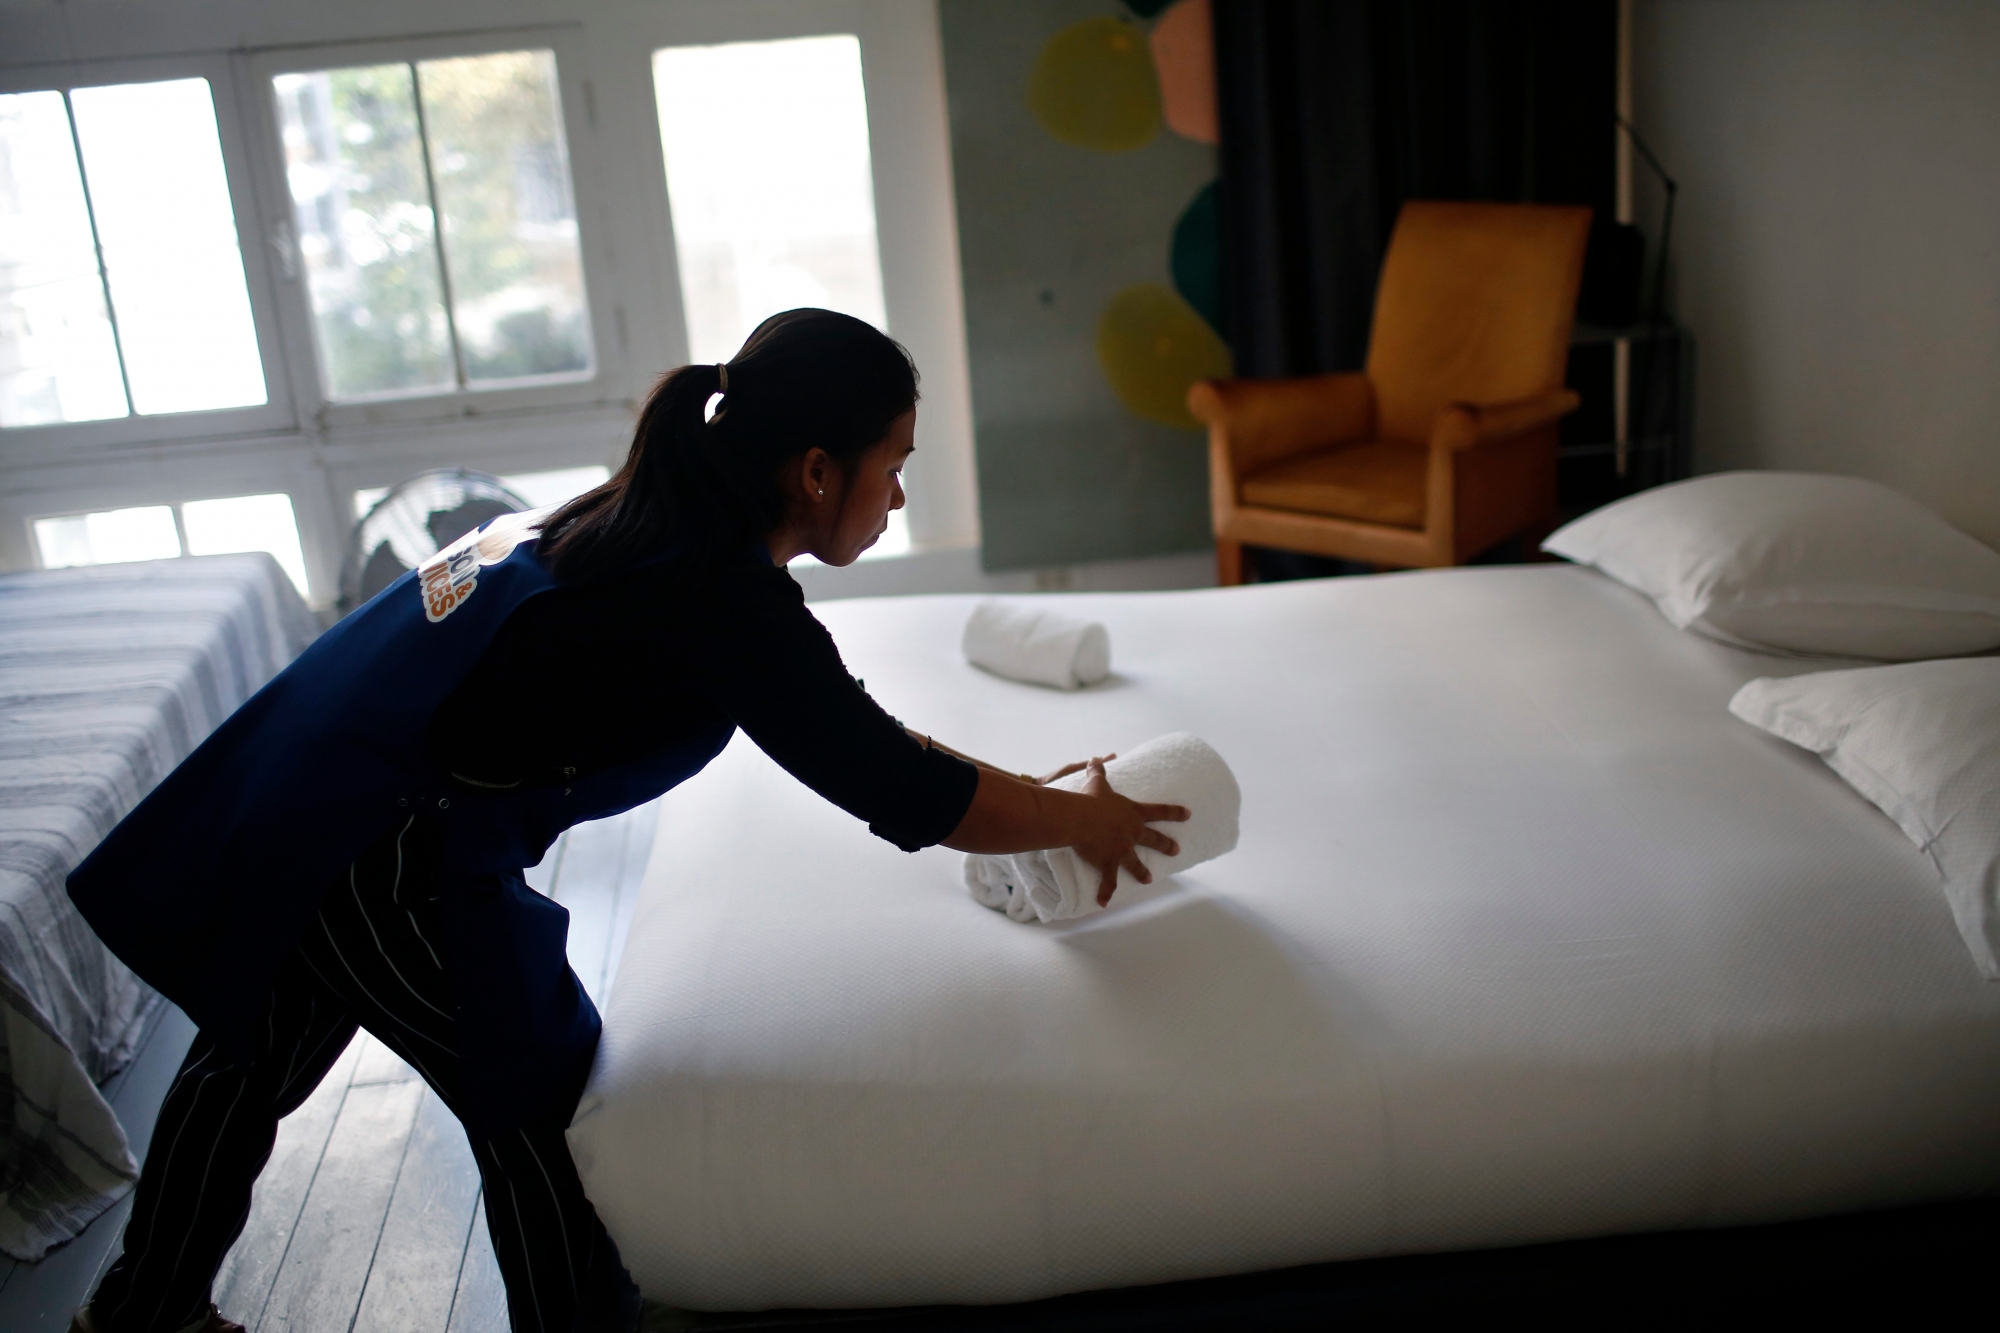 In this Thursday, Sept. 20, 2018 photo, a cleaning lady works in an apartment located on Airbnb in Paris. The spectacular growth of Airbnb in Paris, the top worldwide location for the internet giant is also raising alarms in the French capital. Some Parisians and officials at City Hall blame the site for driving Parisian families out of the city center, leading to school closures and concerns that the French capital is losing its life and charms.  (AP Photo/Thibault Camus) France Fighting Airbnb